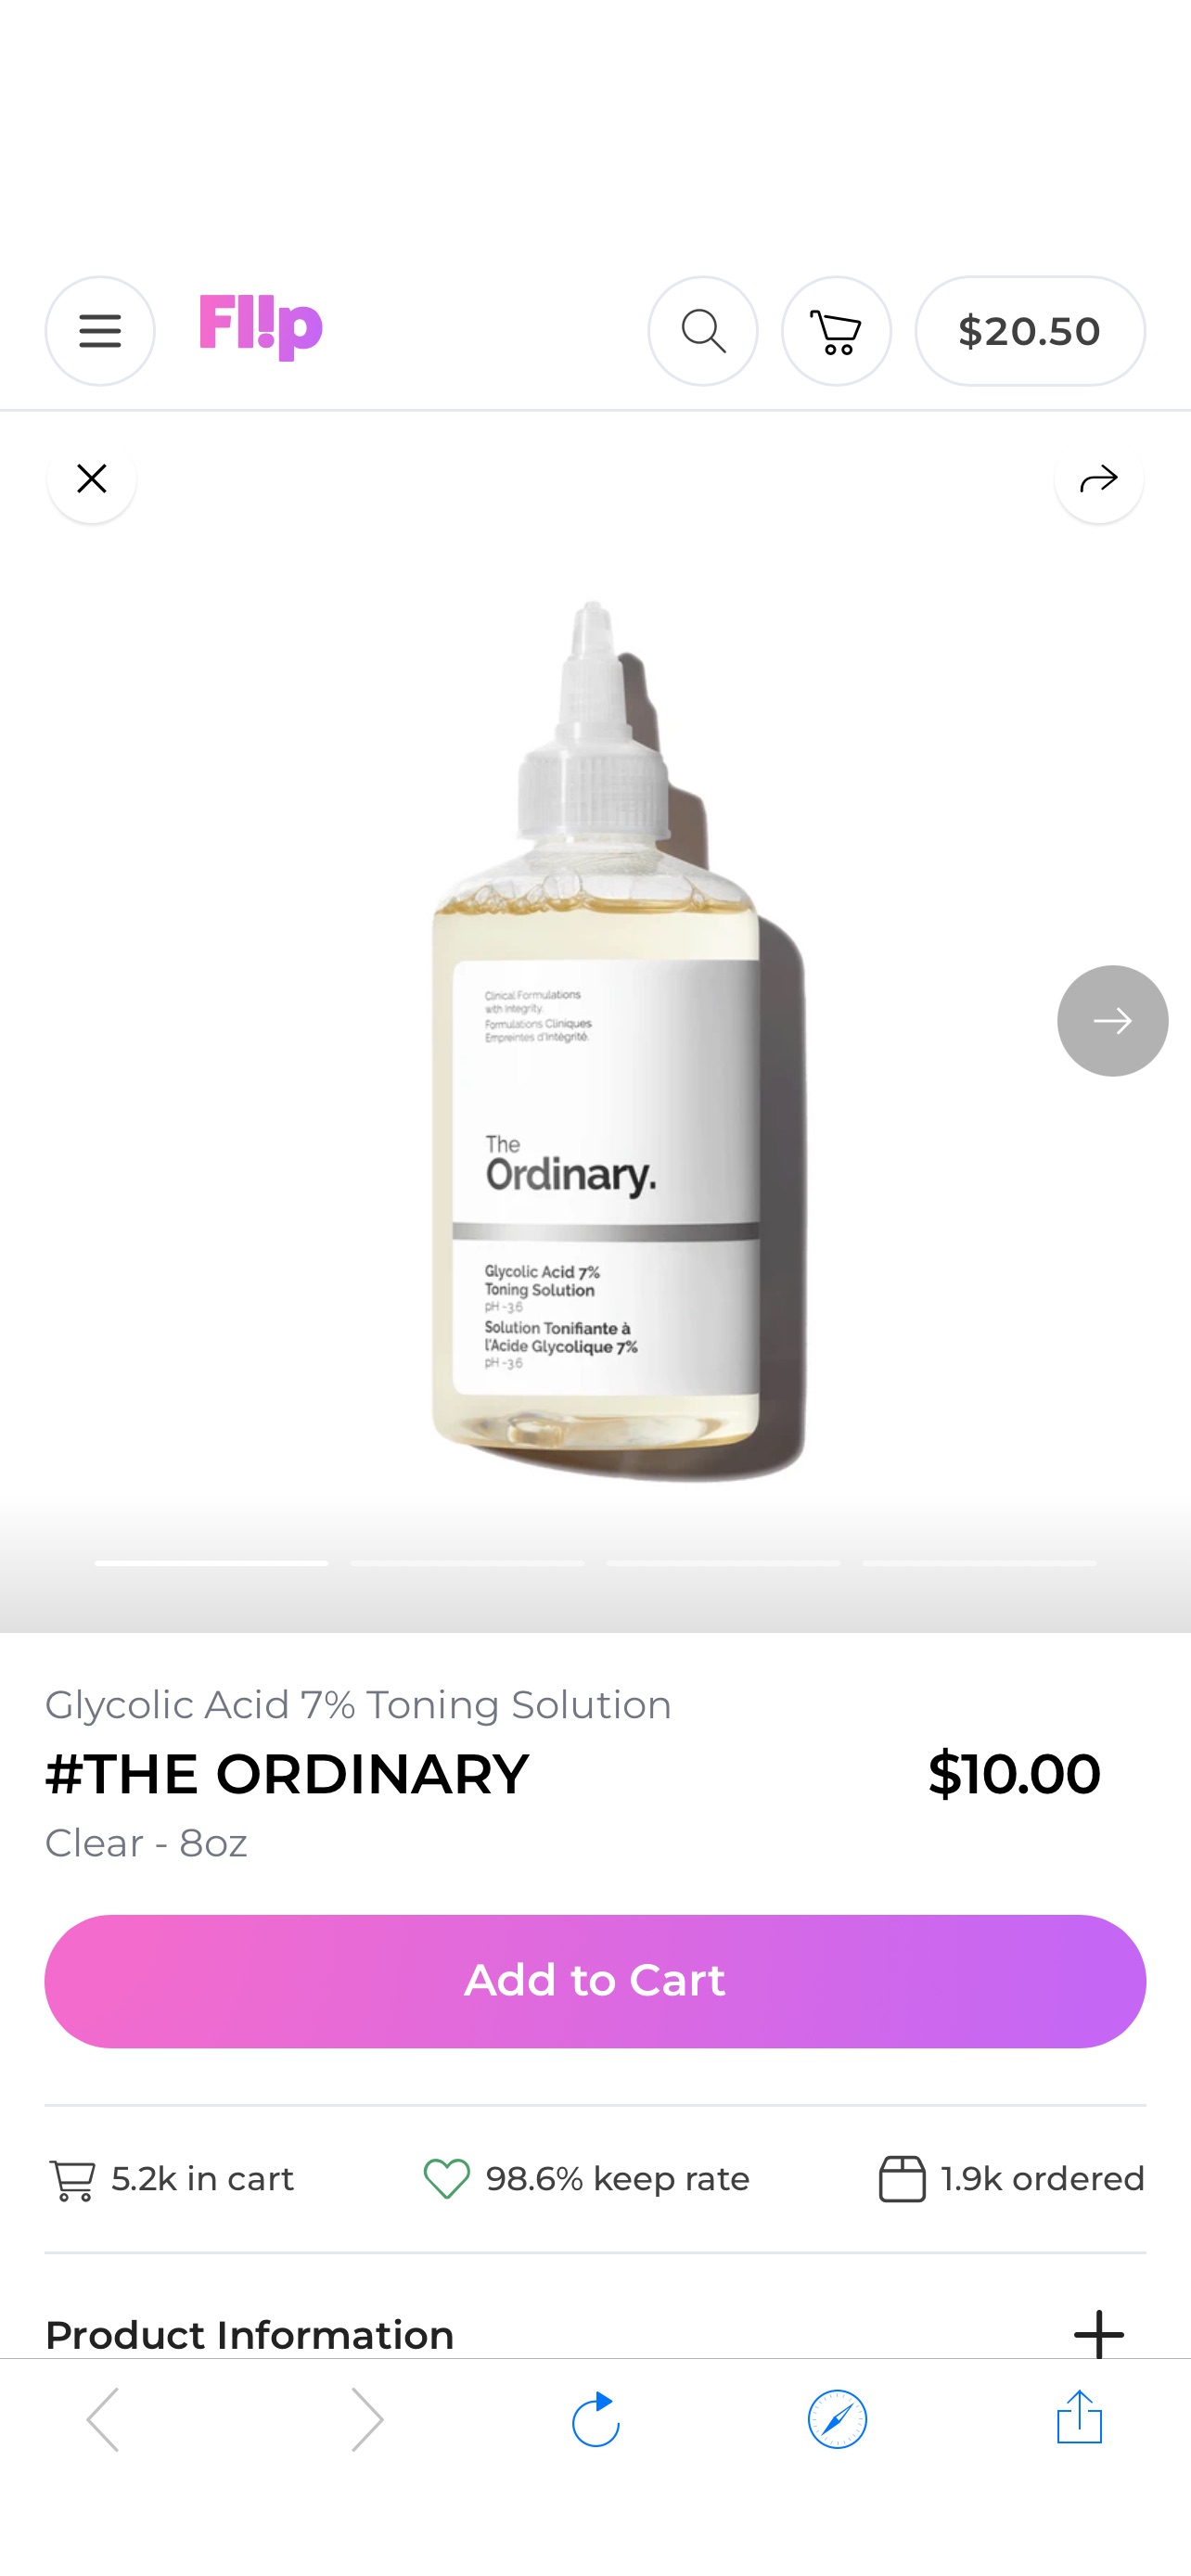 The Ordinary Glycolic Acid 7% Toning Solution: Clear | Flip Social